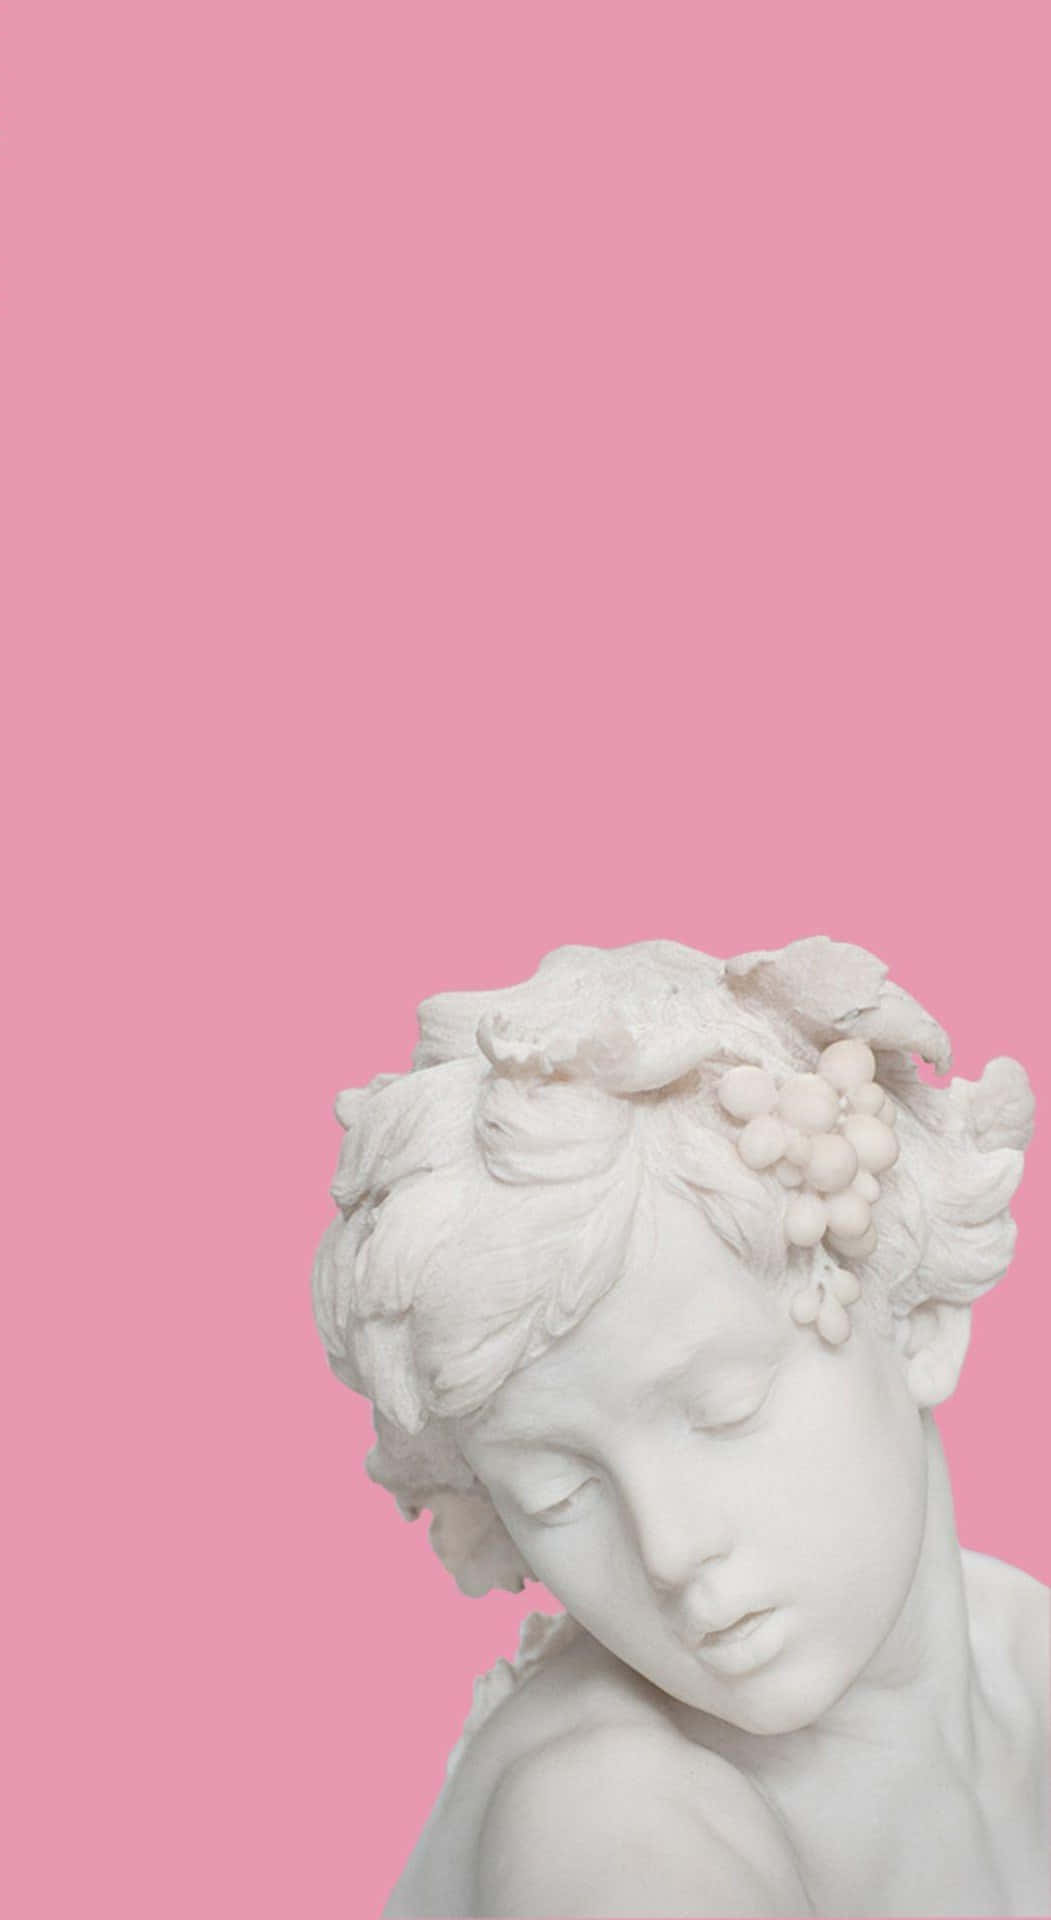 Classical Statue Head Pink Background Wallpaper